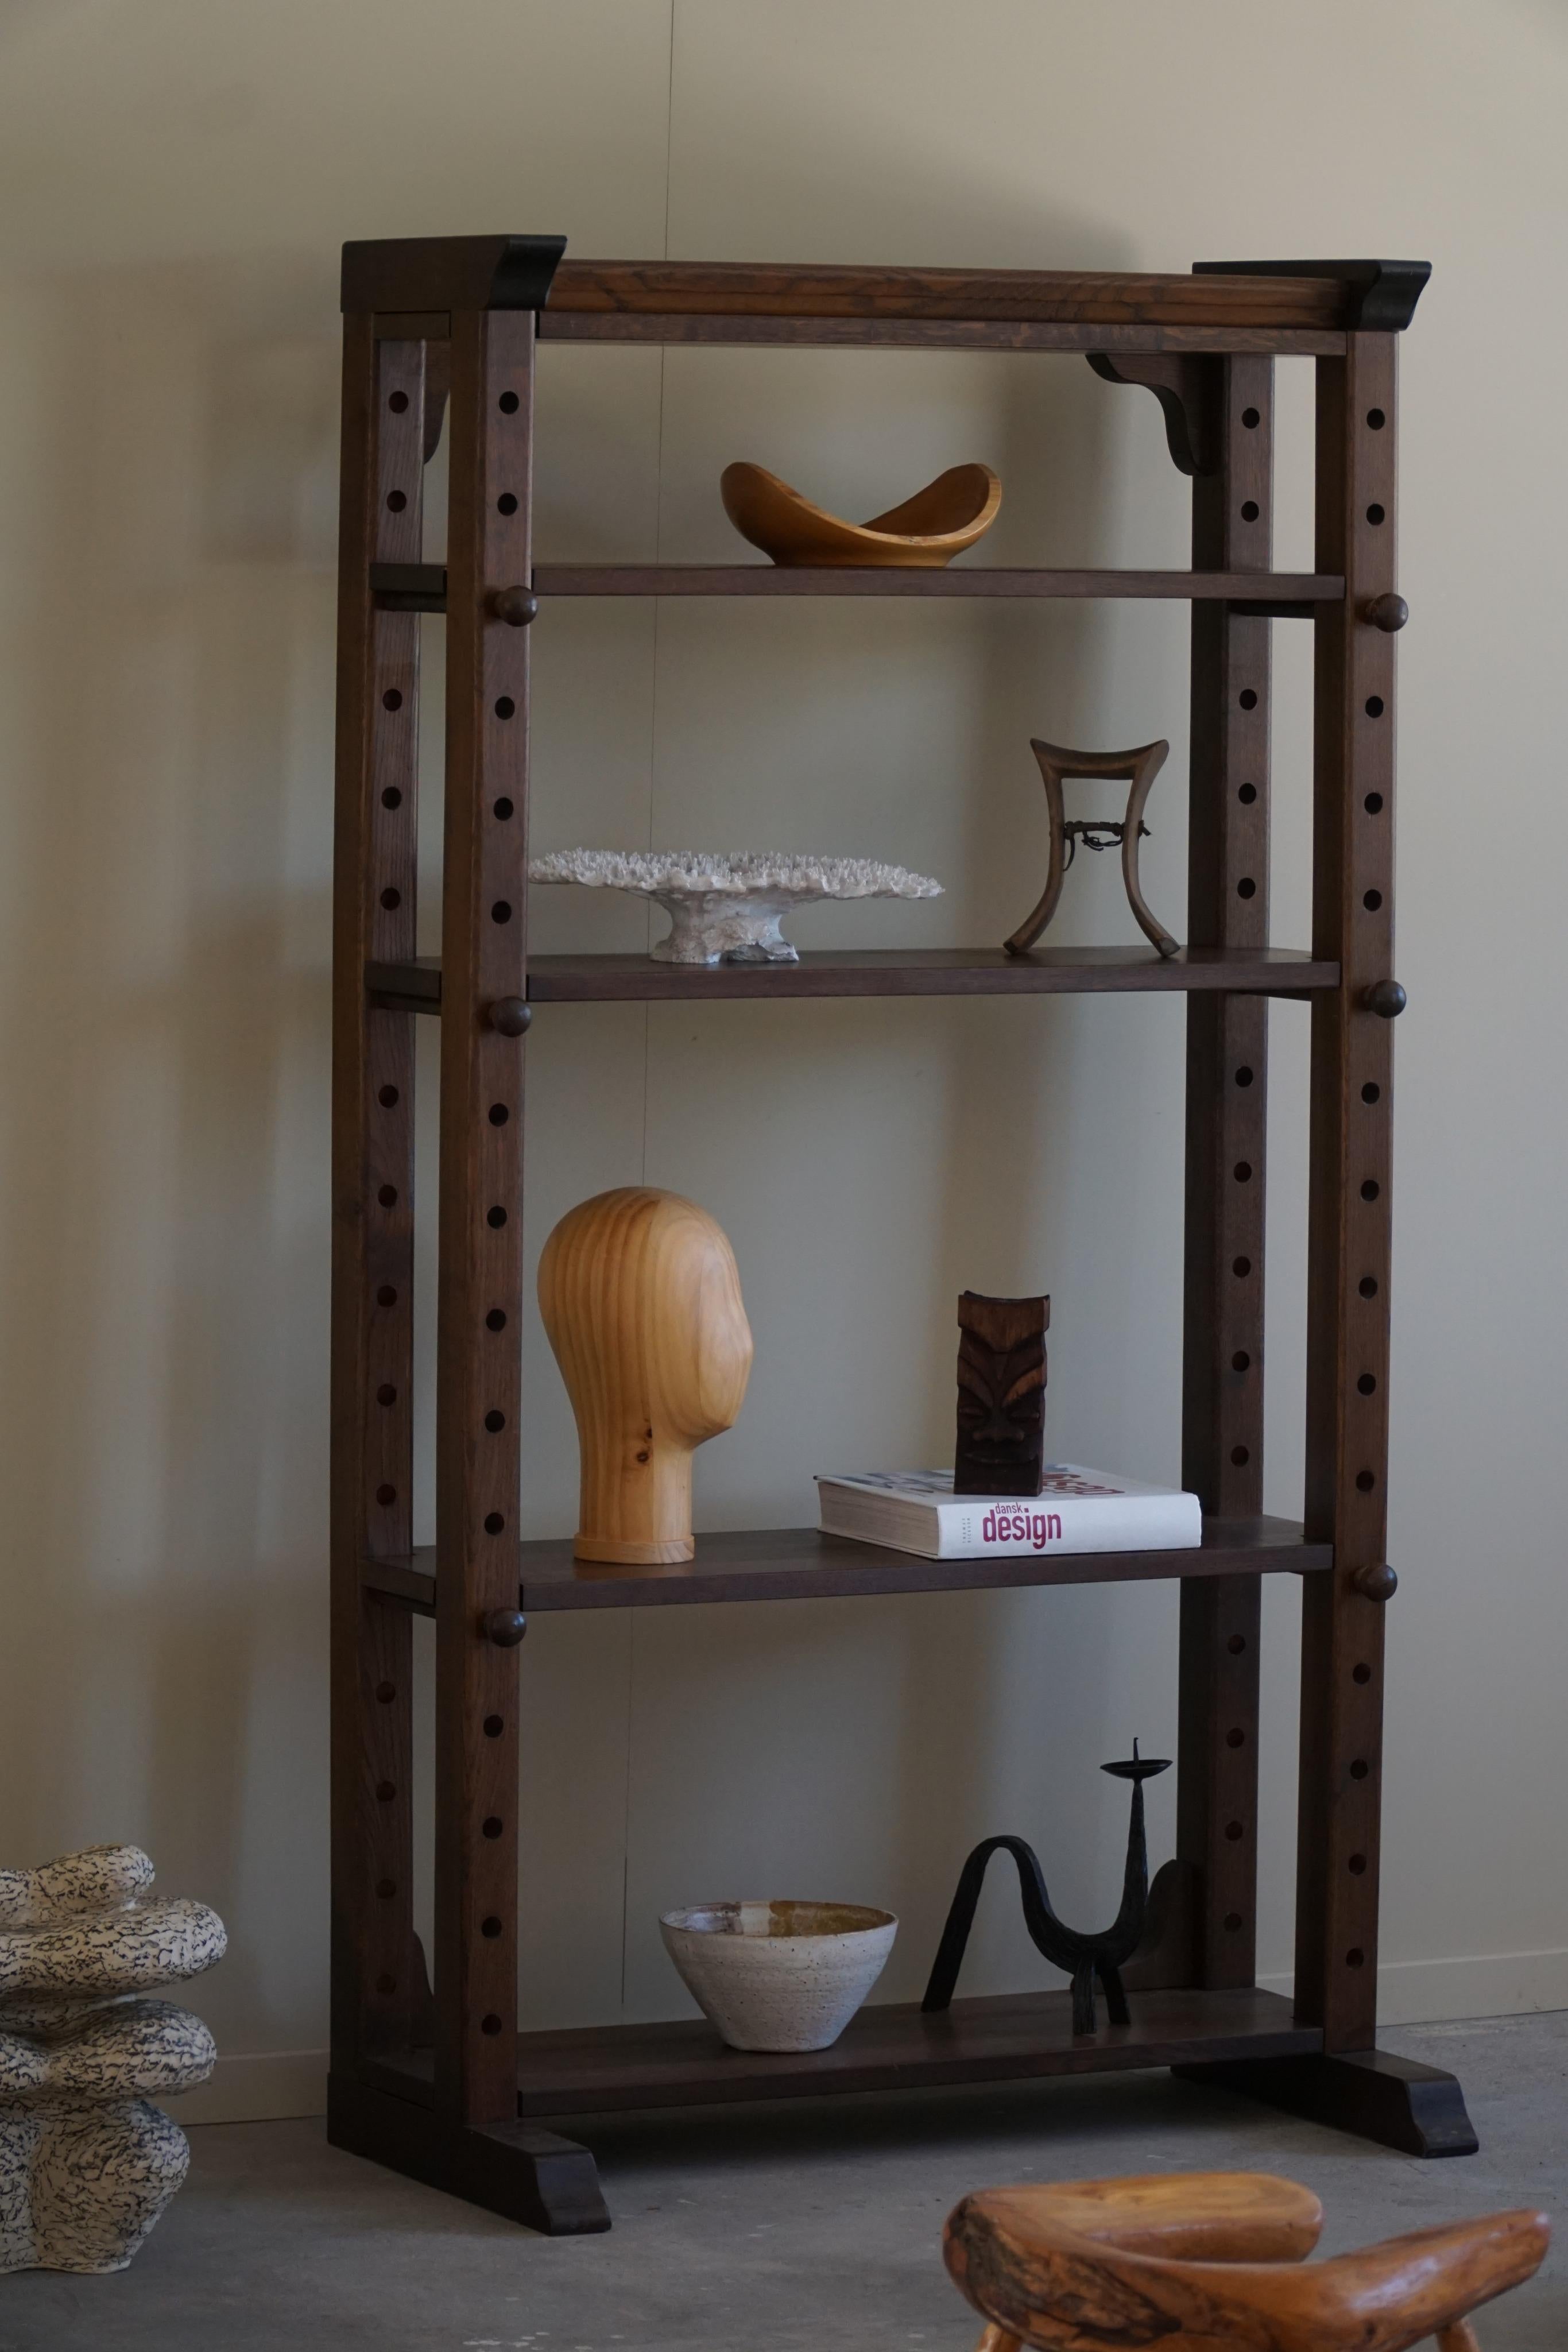 Brutalist Freestanding Mid-Century Modern Shelf Unit in Solid Wood, Made in the 1960s For Sale